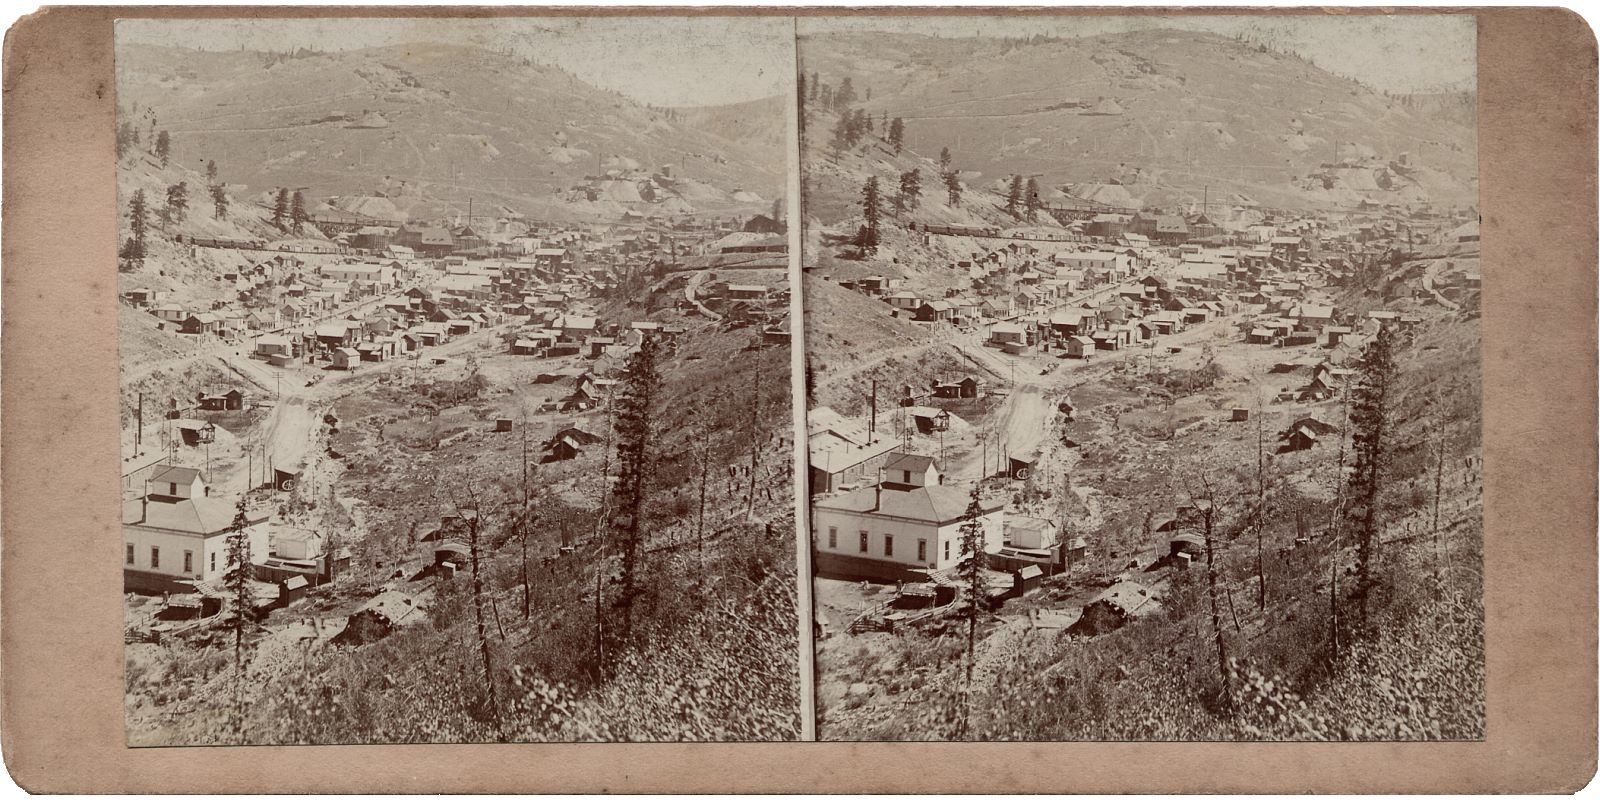 This view from an unmarked Stereoview is showing the town of Anaconda with the School House and part of the Hartzell Mill in the foreground left. In the background is Gold hill and some of its mines, while the town itself is located near the Anaconda mine. Anaconda mine is about 1/3 down from the top and about middle-of-view in the left/right direction. About halfway up on the left side is the Ore-house of the Blue Bell mine just above the school house cupola.